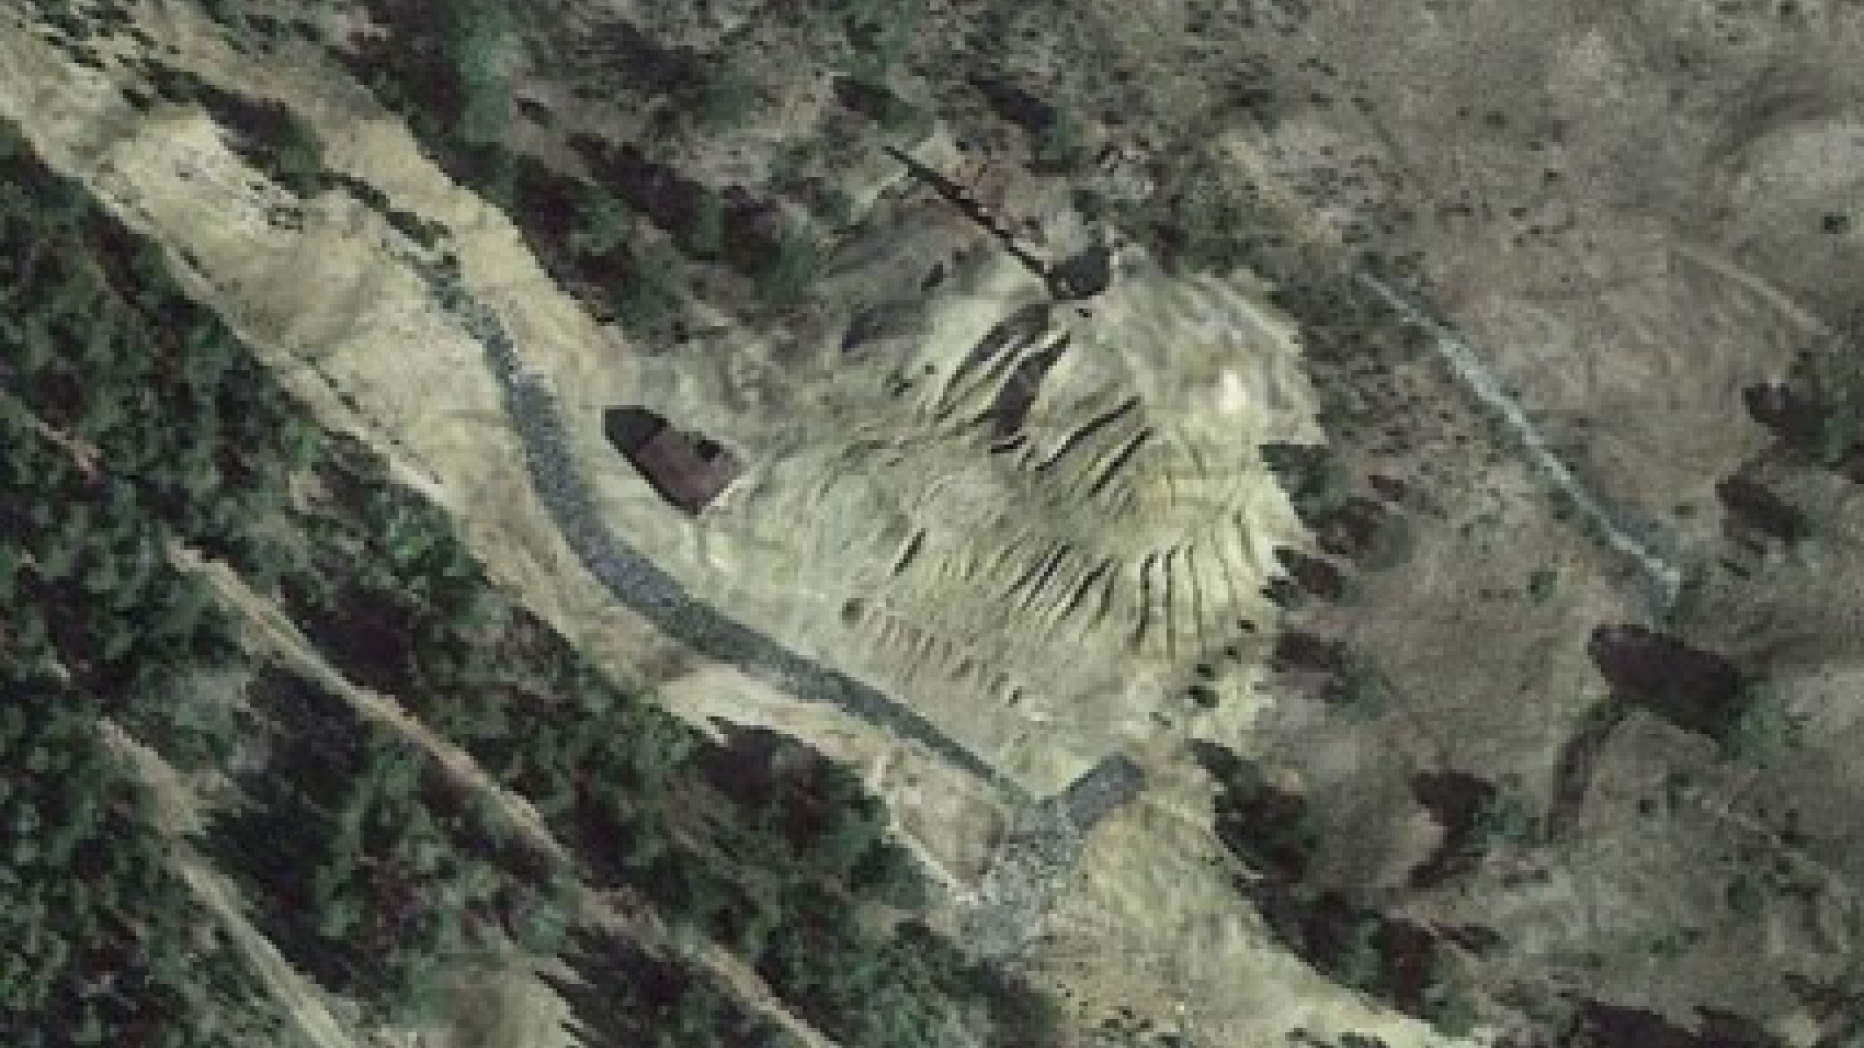 Satellite view of industrial mining dump. Border between green space and contaminated space is clearly defined